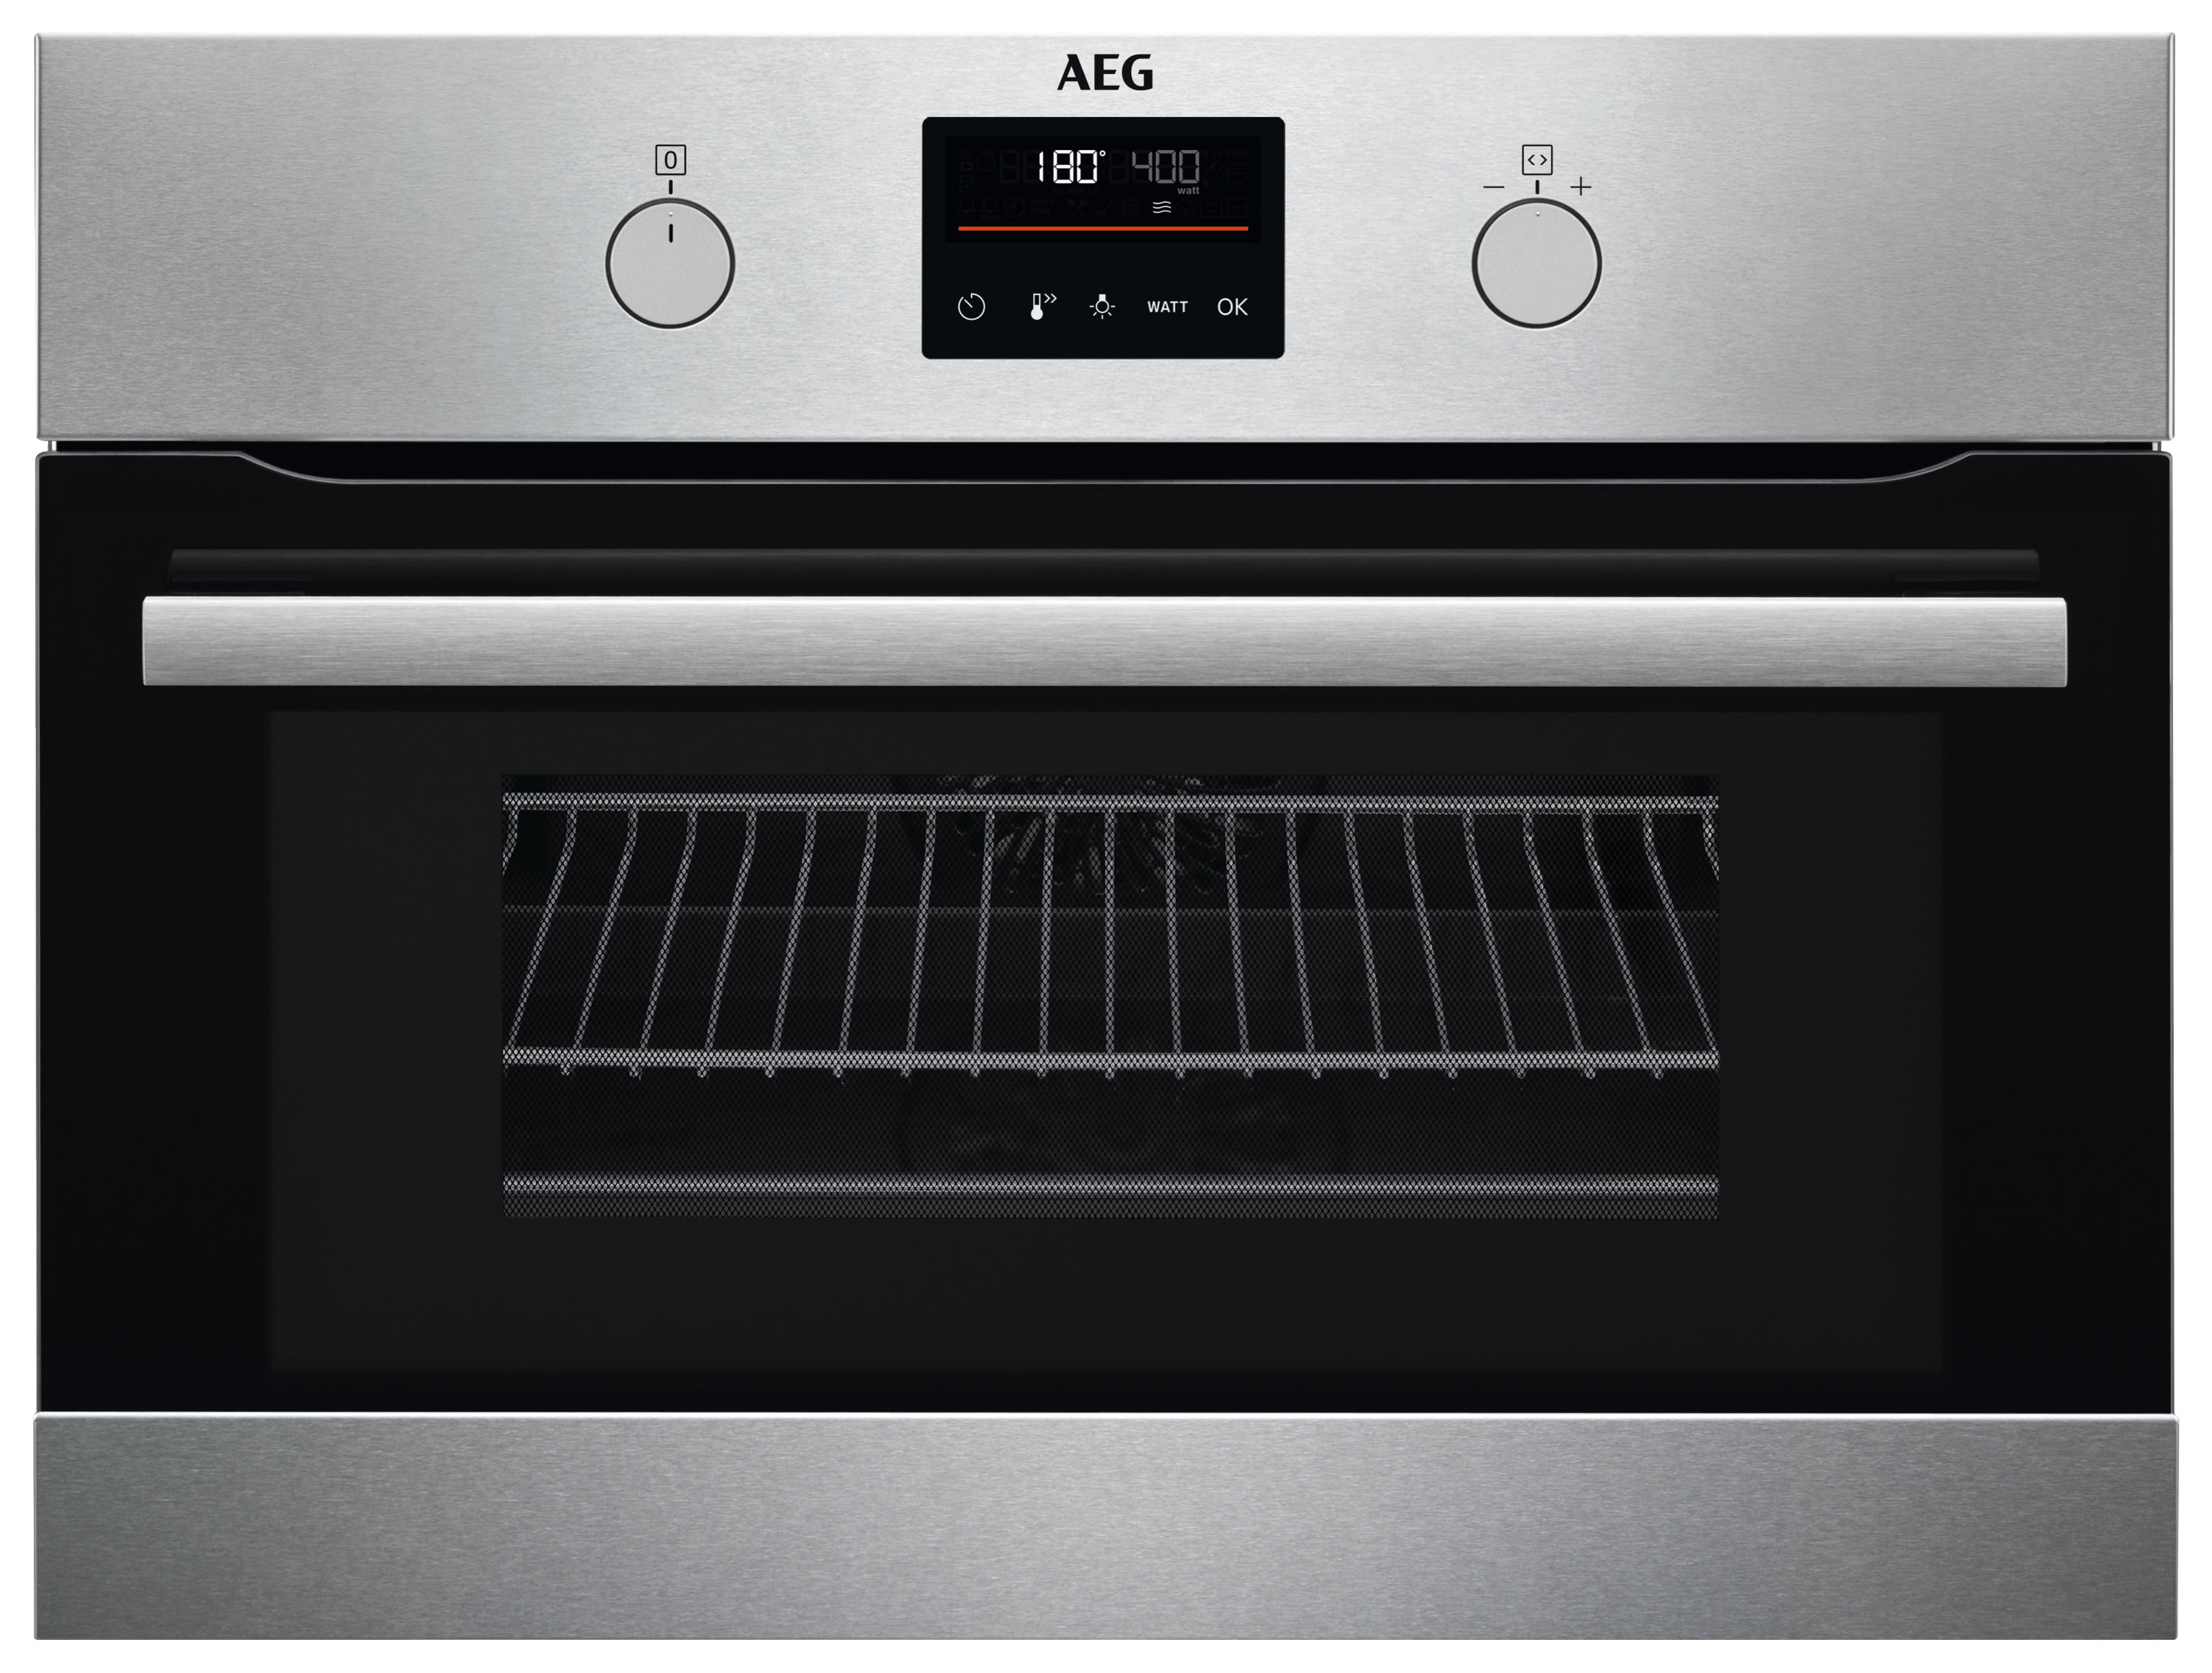 AEG KMK365060M 8000 Series Convection Oven with Microwave - Stainless Steel